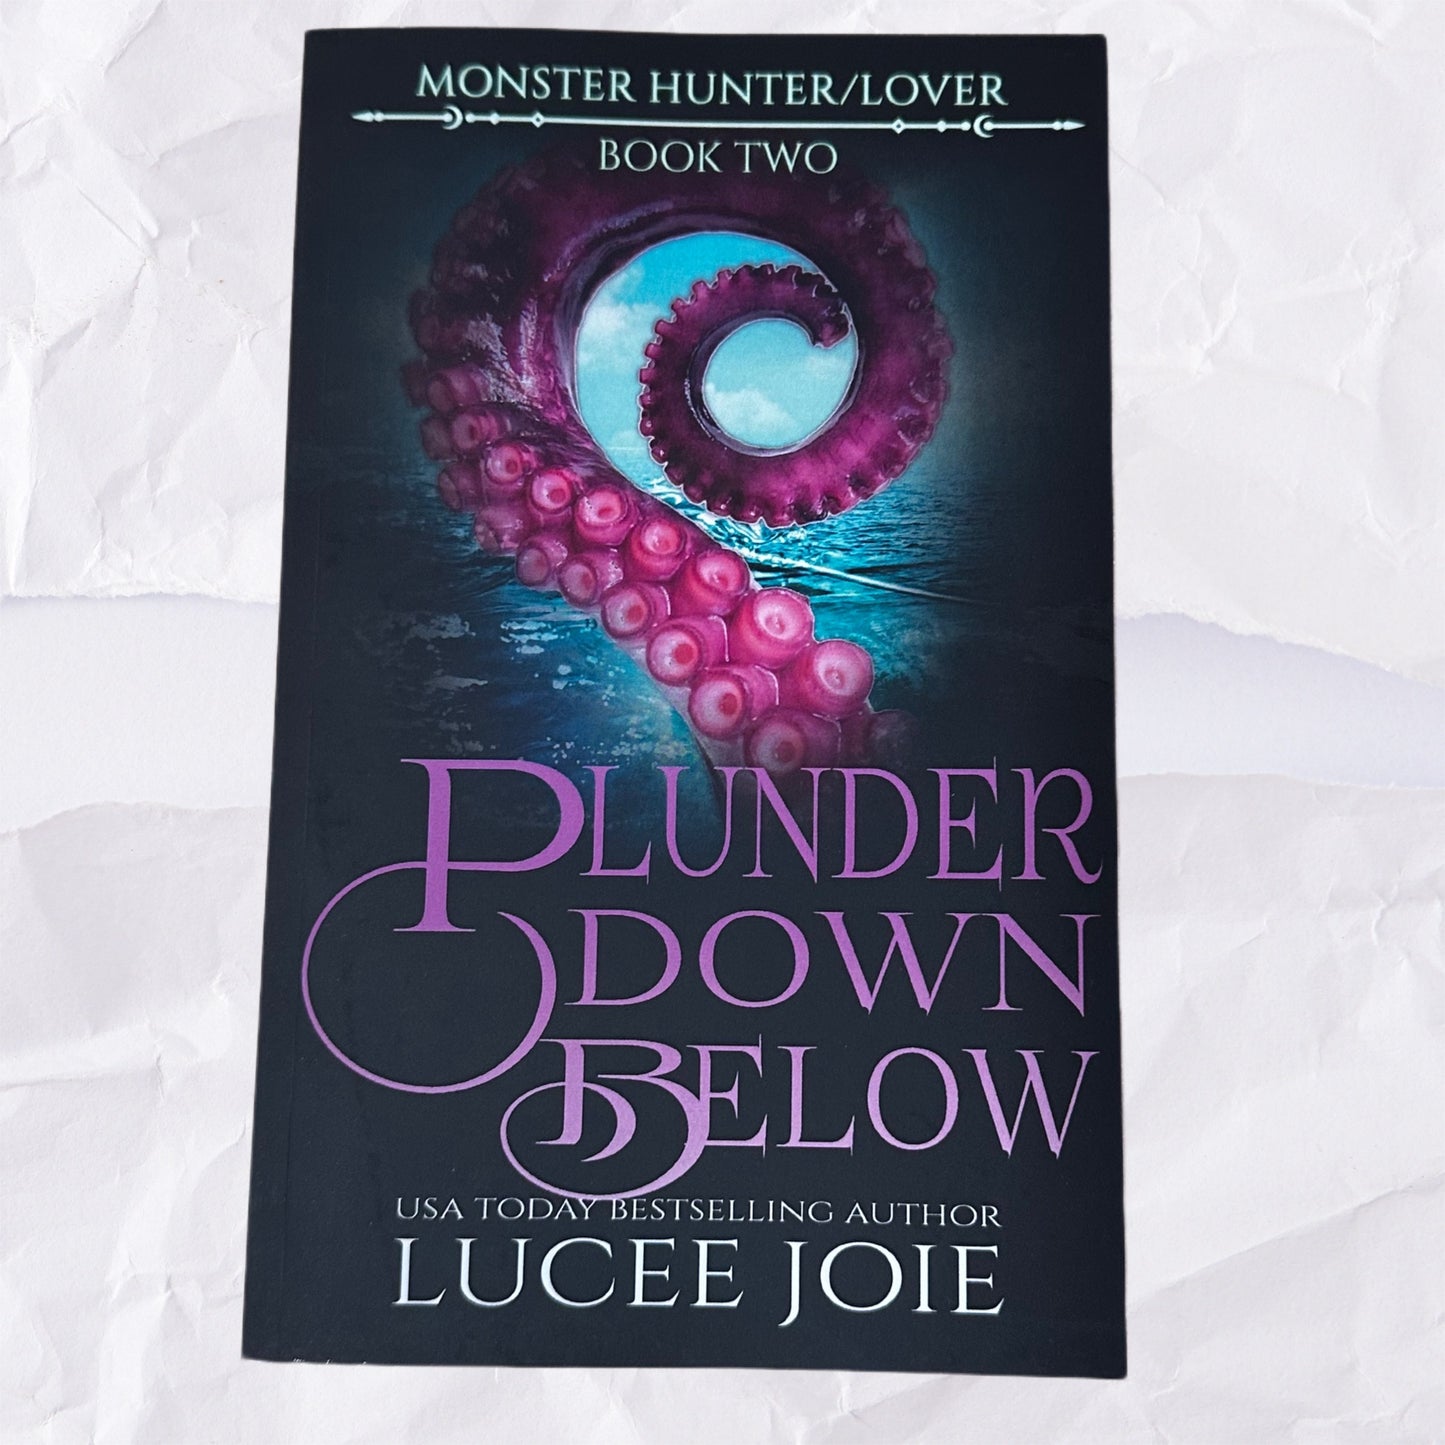 Plunder Down Below (Monster Hunter/Lover #2) by Lucee Joie